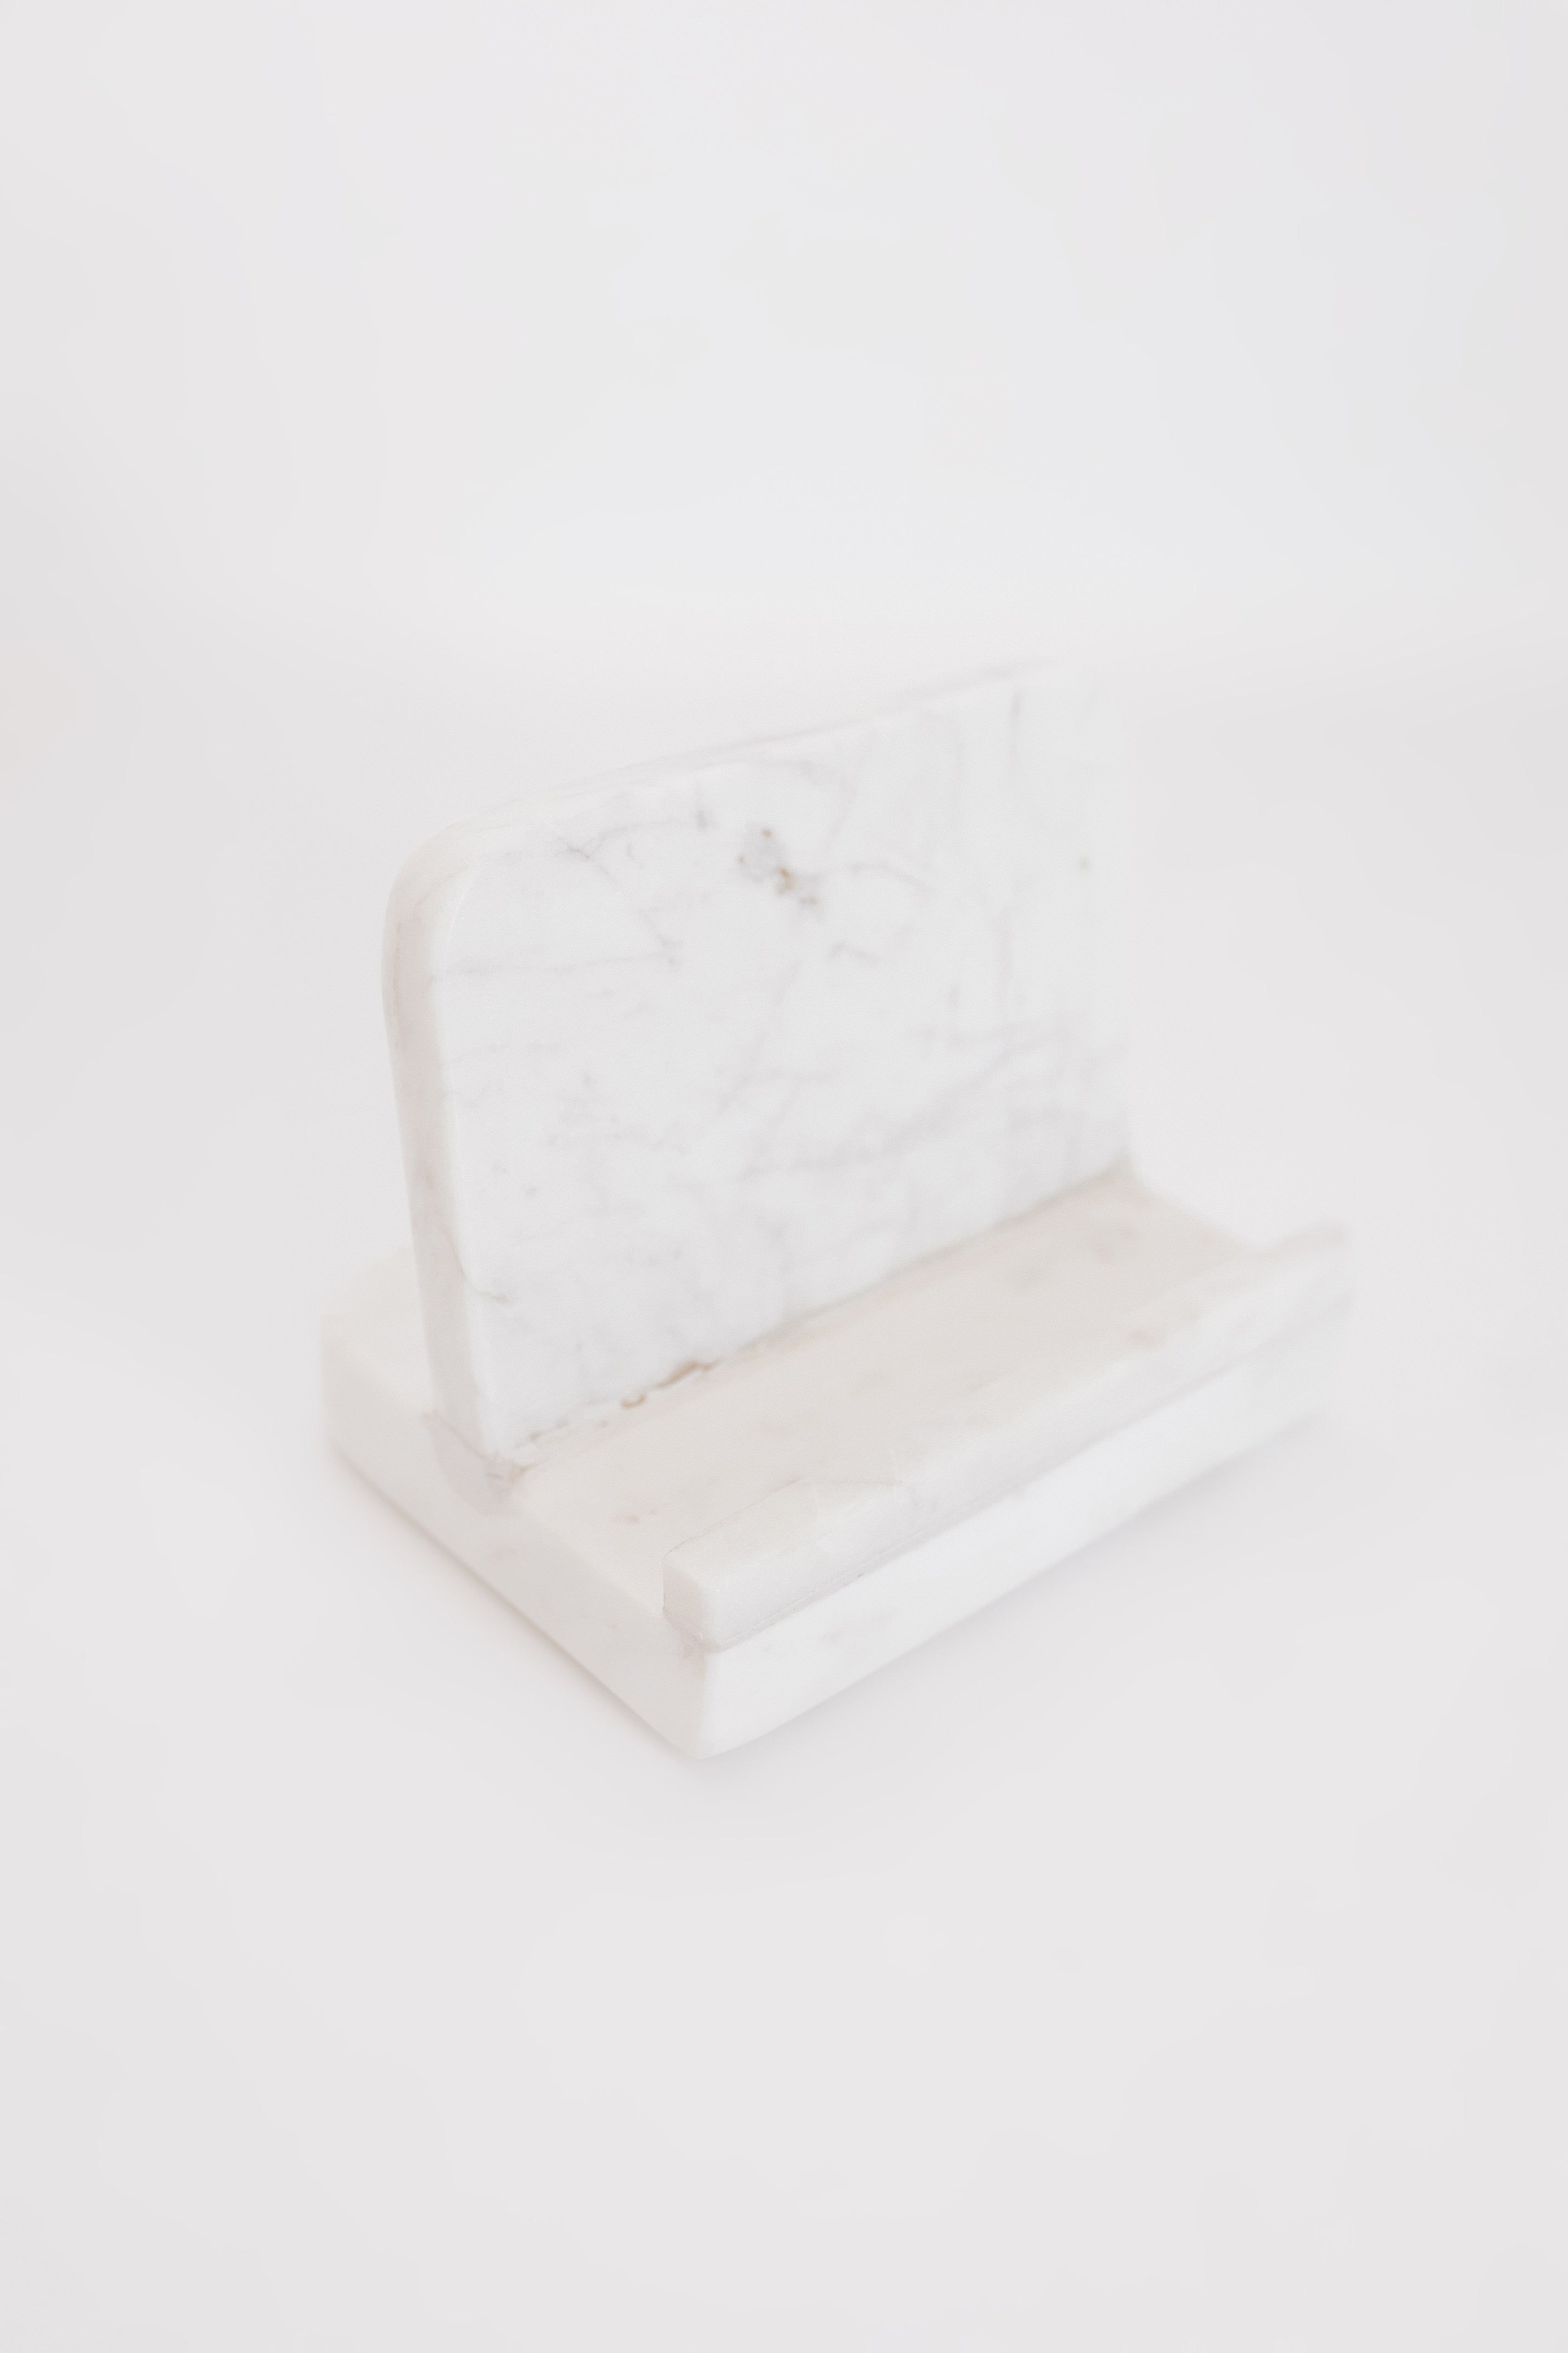 Hayes Marble Book Stand